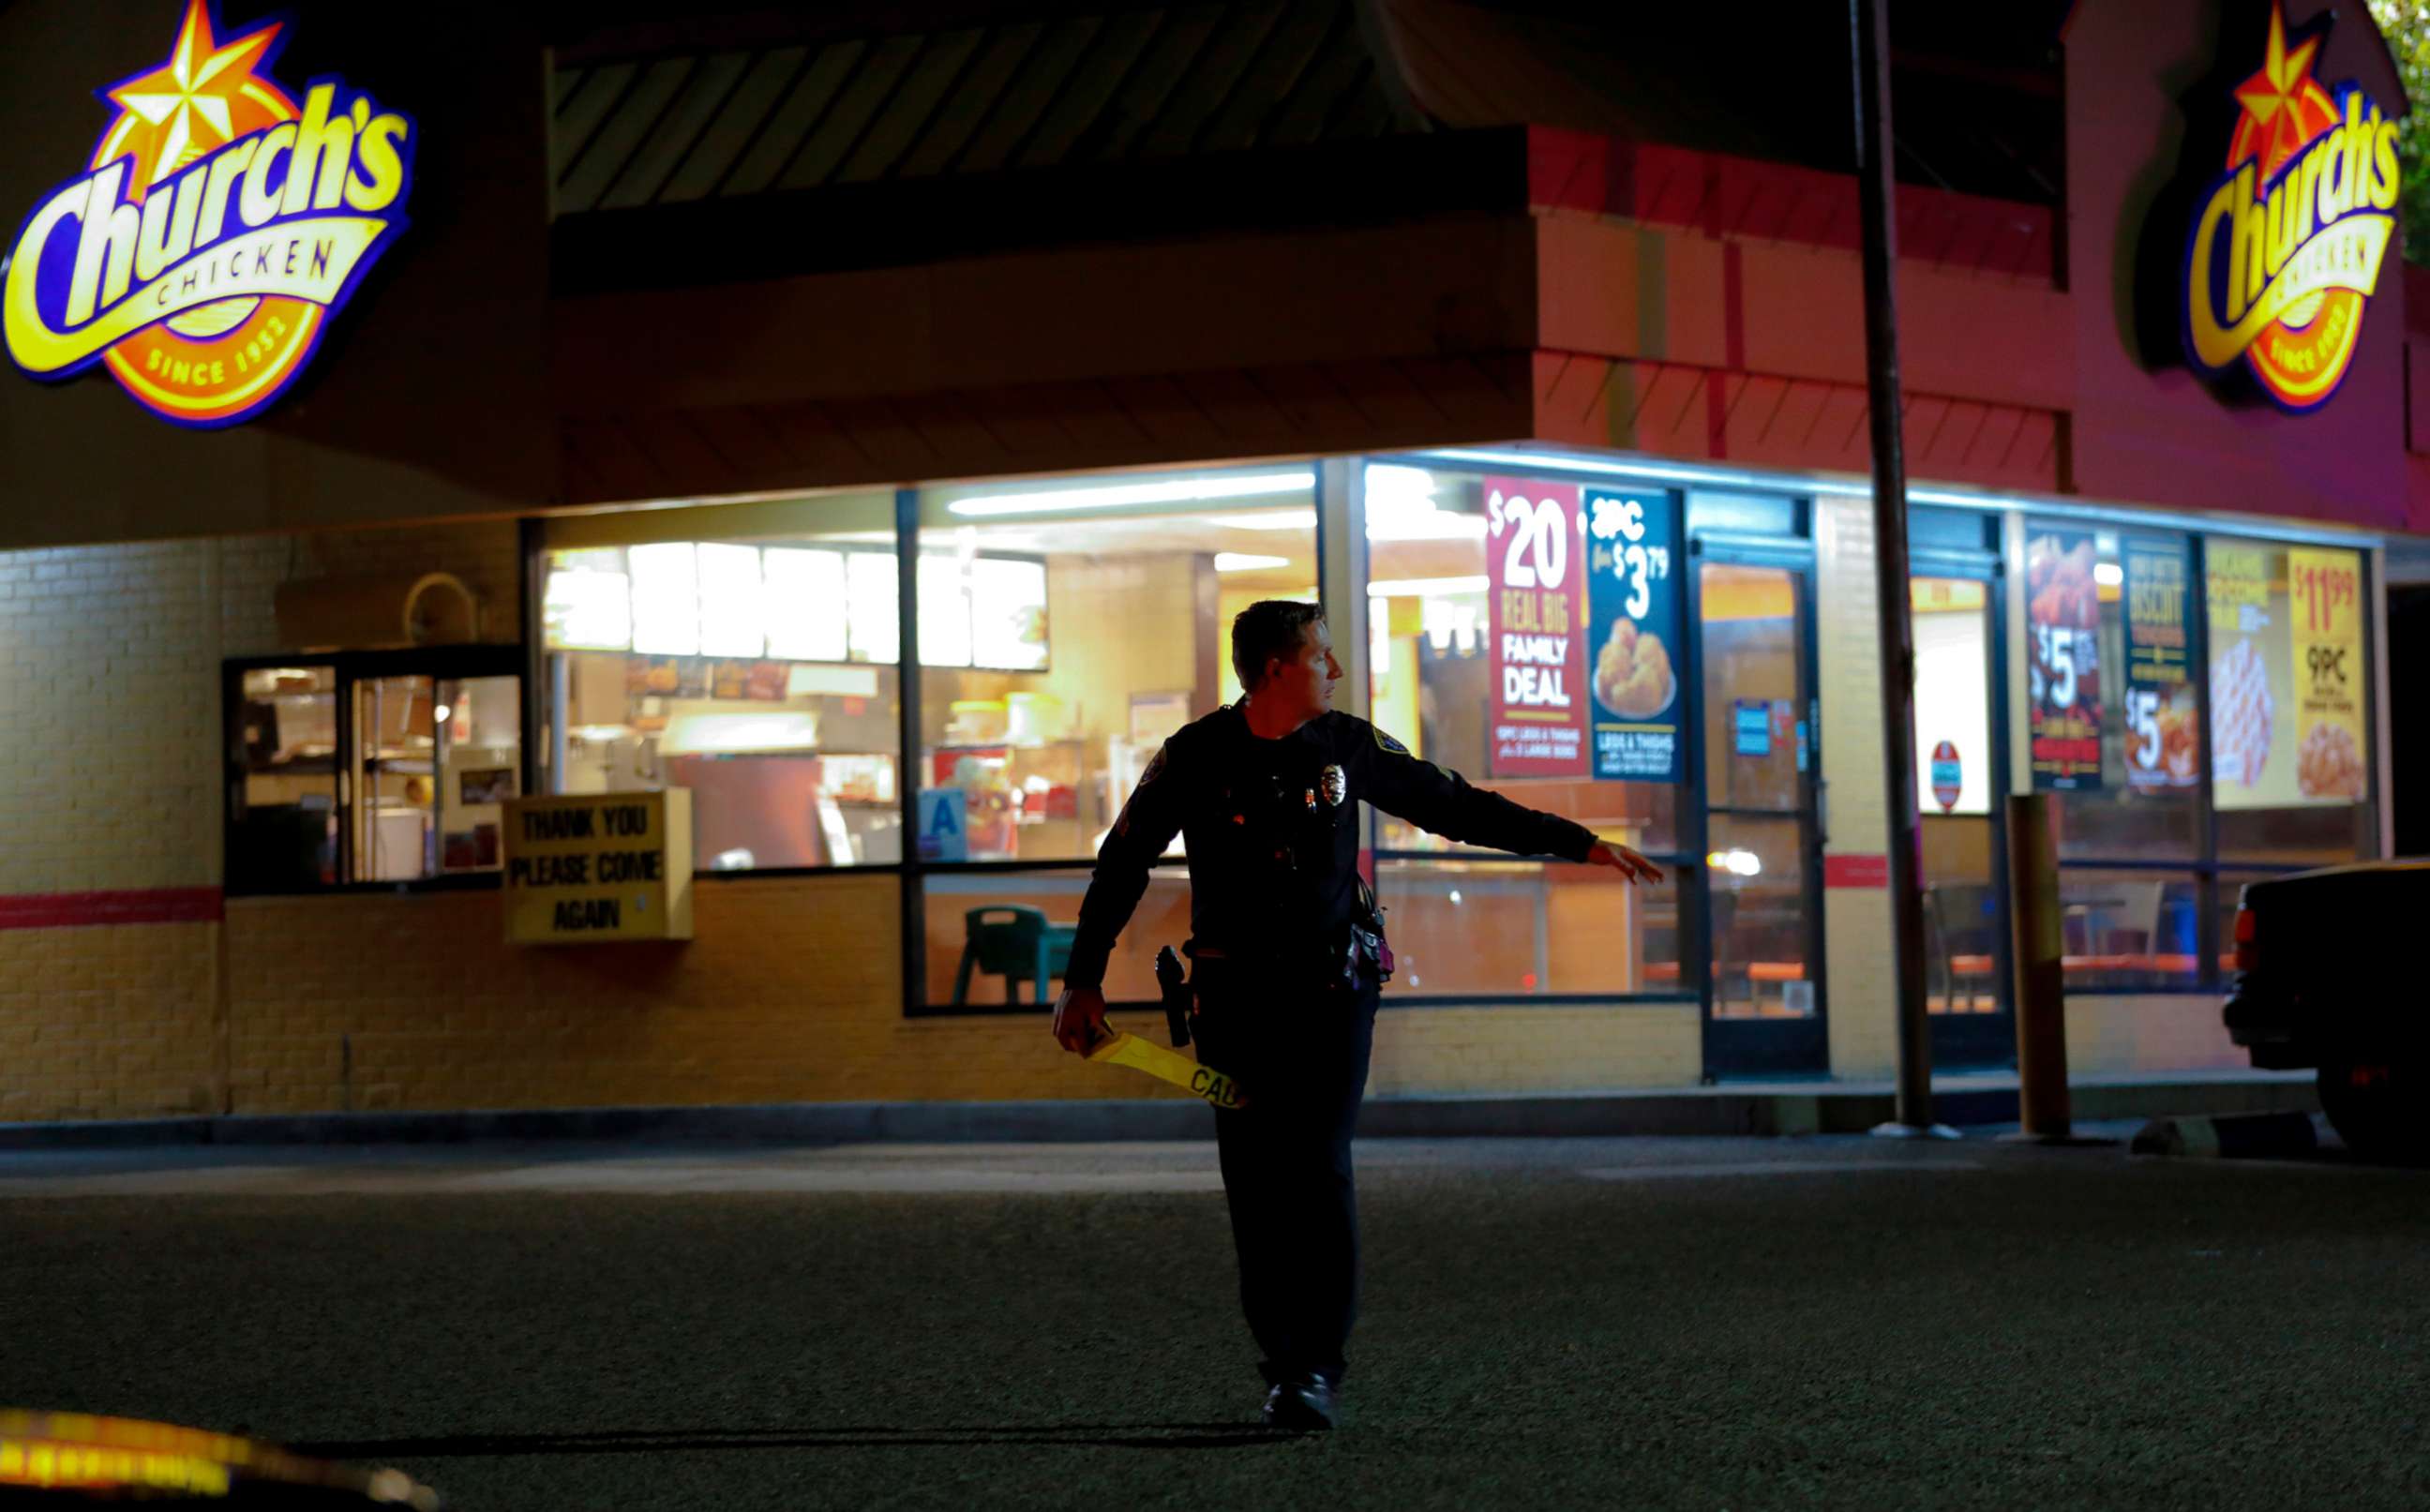 PHOTO: San Diego Police officers seal off the area around a Church's Chicken eatery in San Diego after a shooting on Nov. 6, 2019.